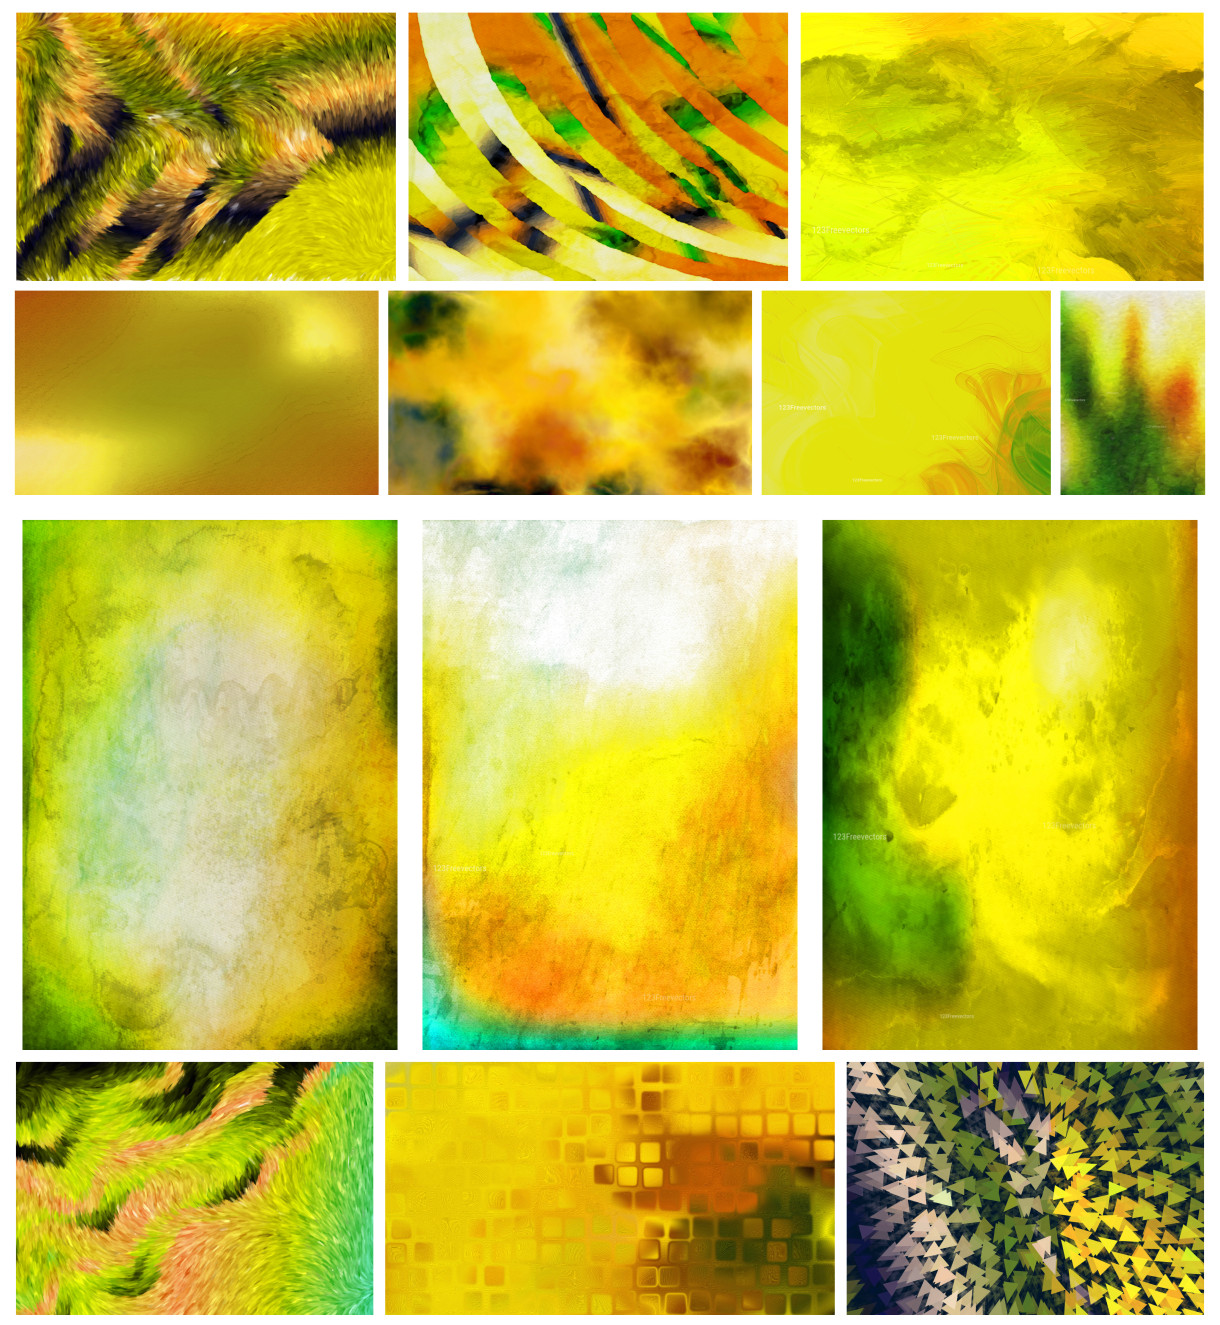 Vibrant Fusion: A Creative Collection of Orange Yellow and Green Designs